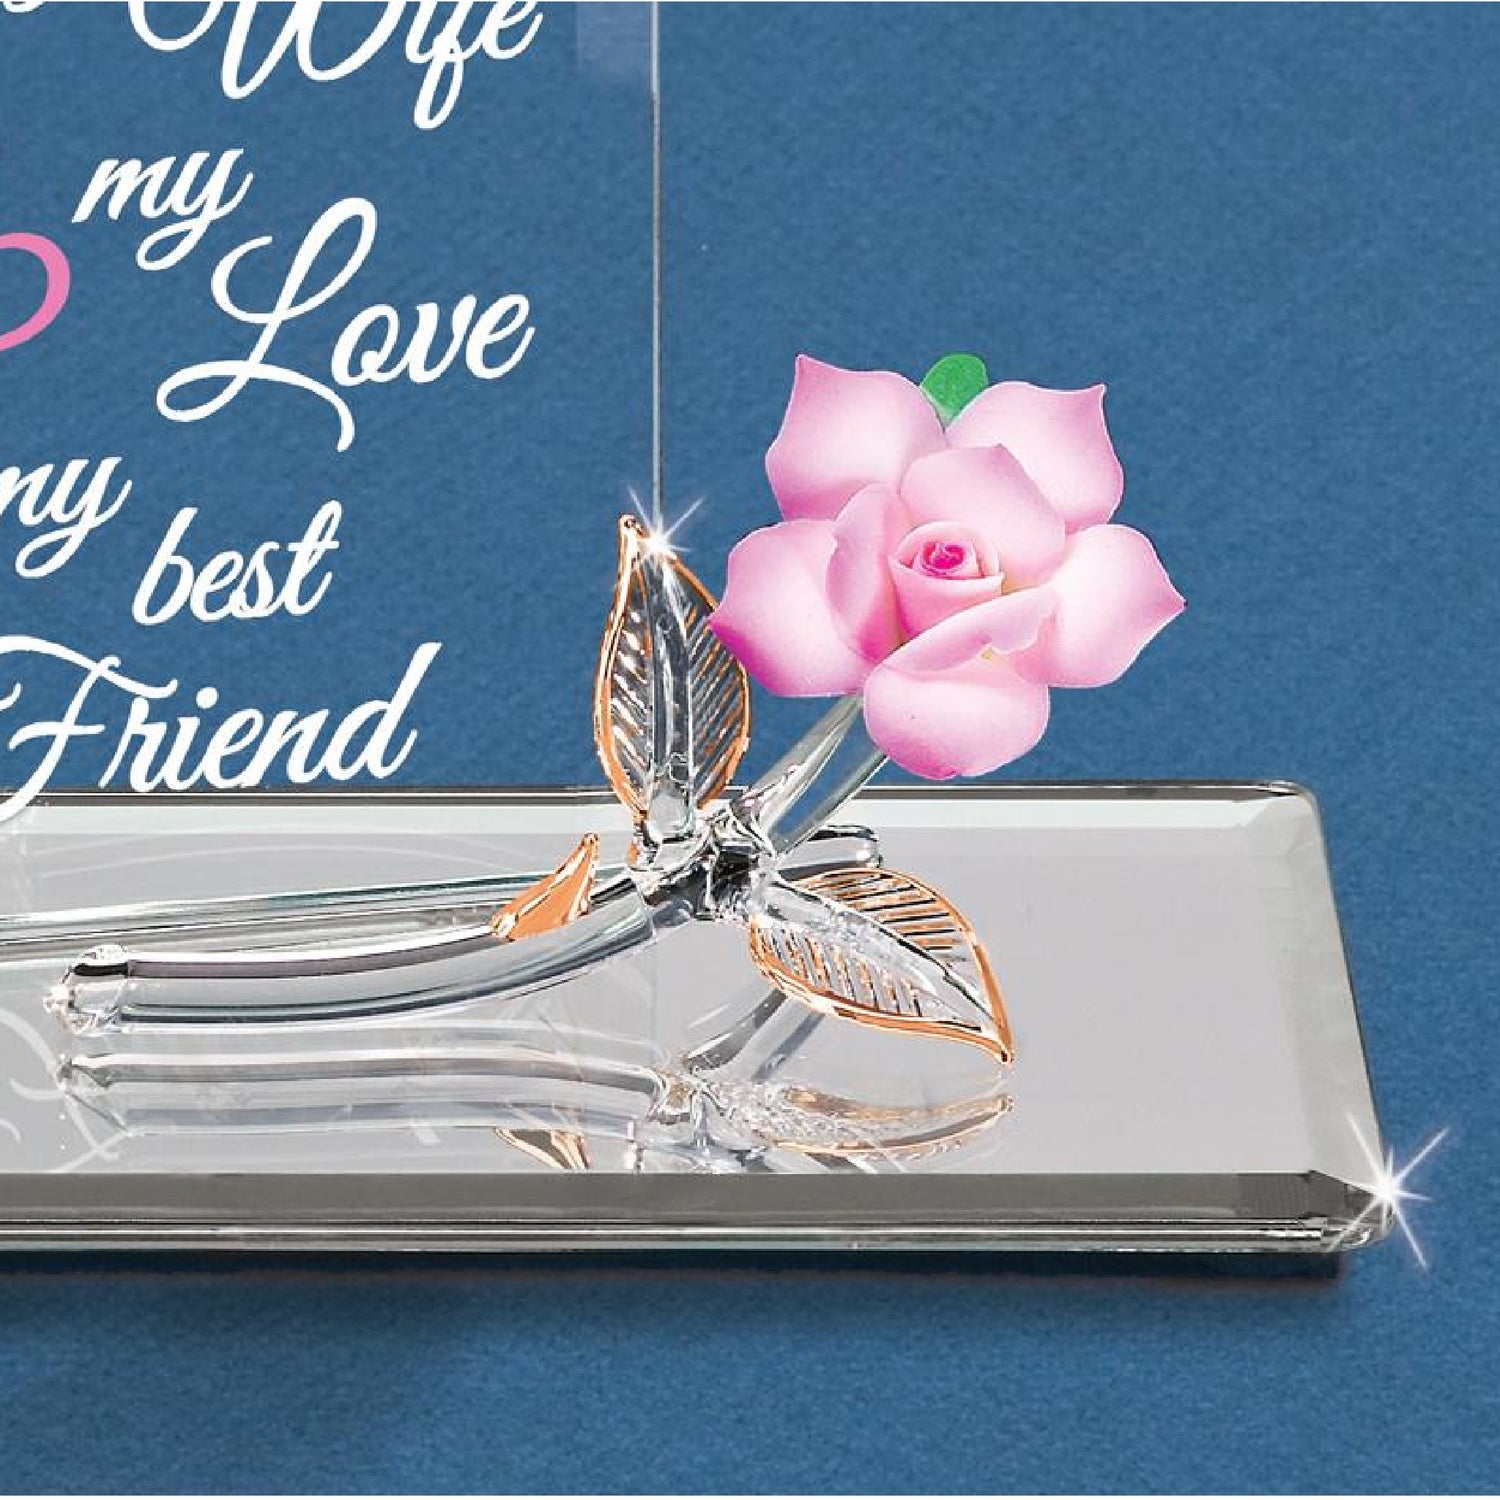 Glass Baron "My Wife, My Best friend" with Pink Rose Figurine Plaque